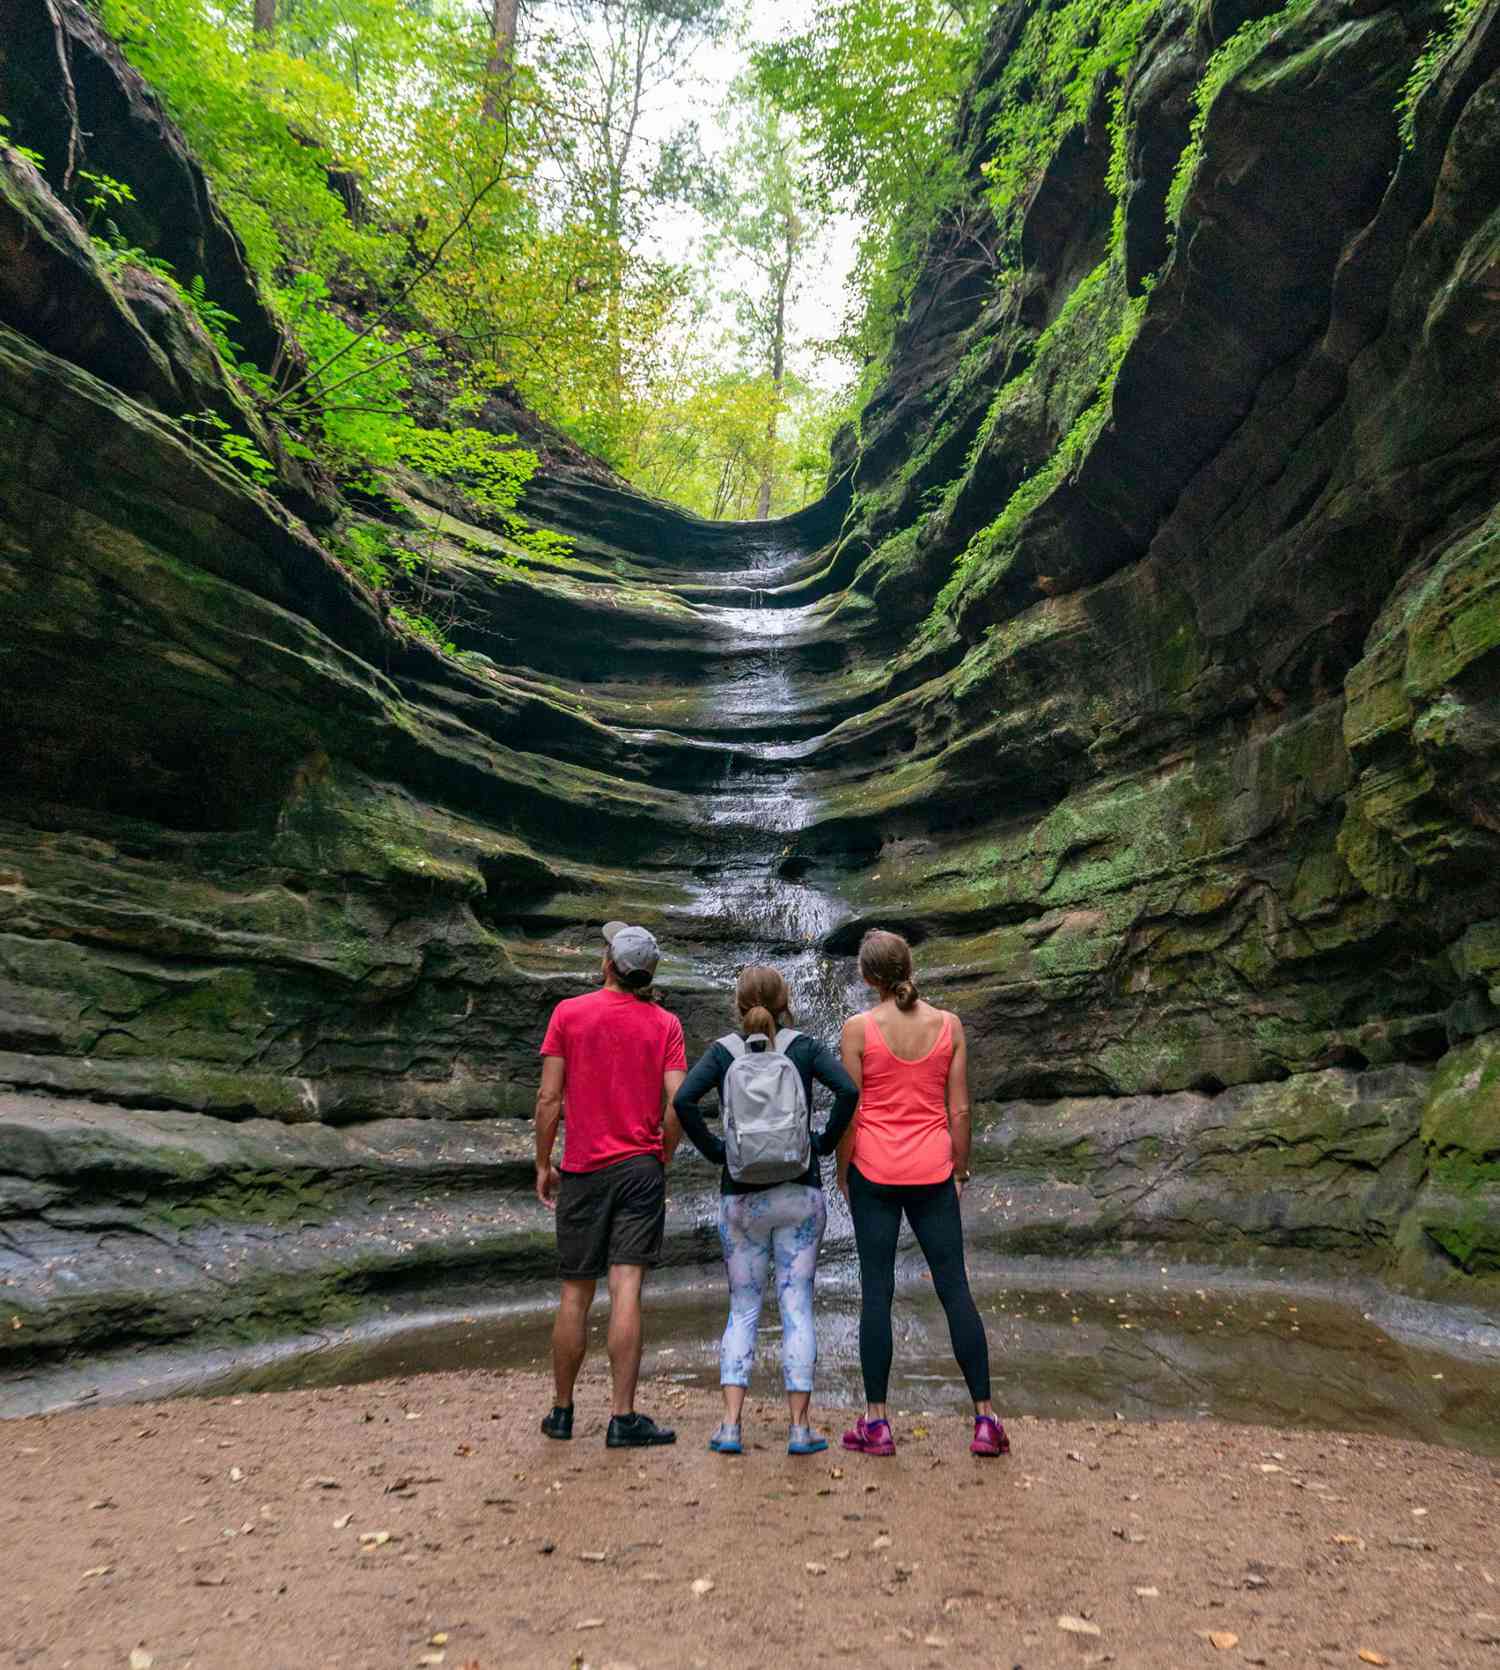 Illinois: Starved Rock State Park